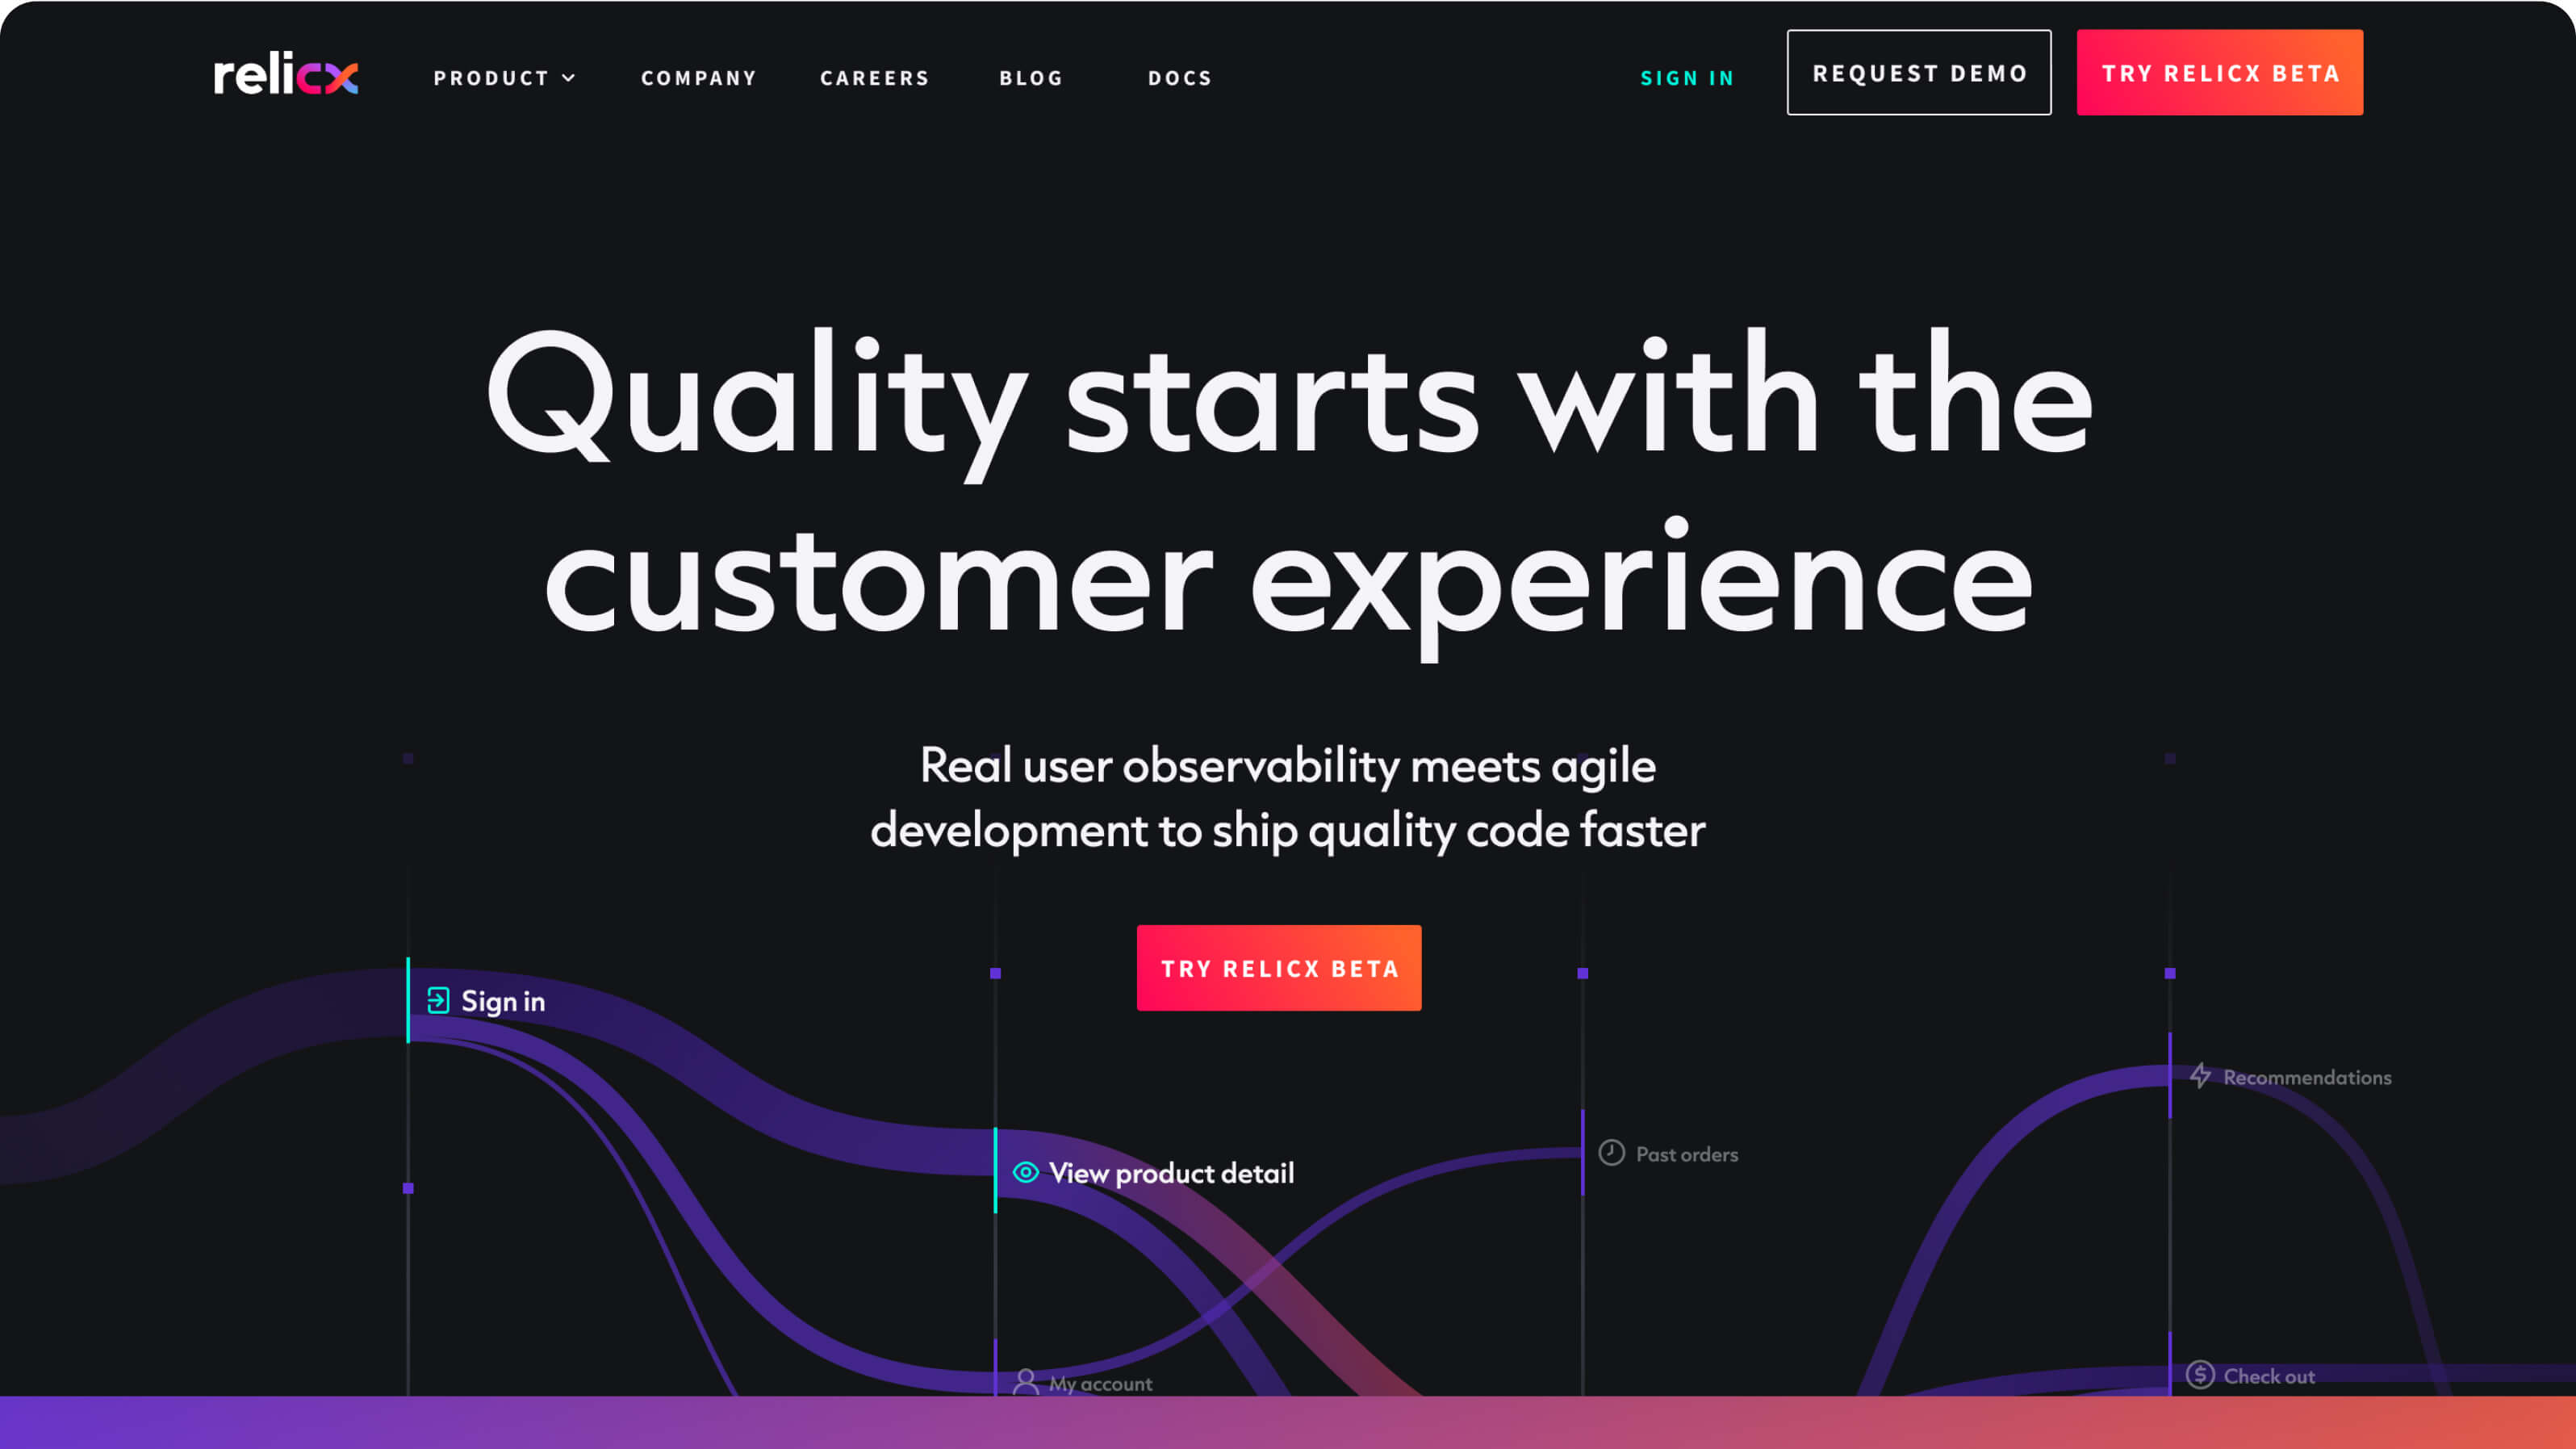 Screen design of the Relicx website homepage, containing a sankey diagram and headline that reads “Quality starts with the customer experience”.